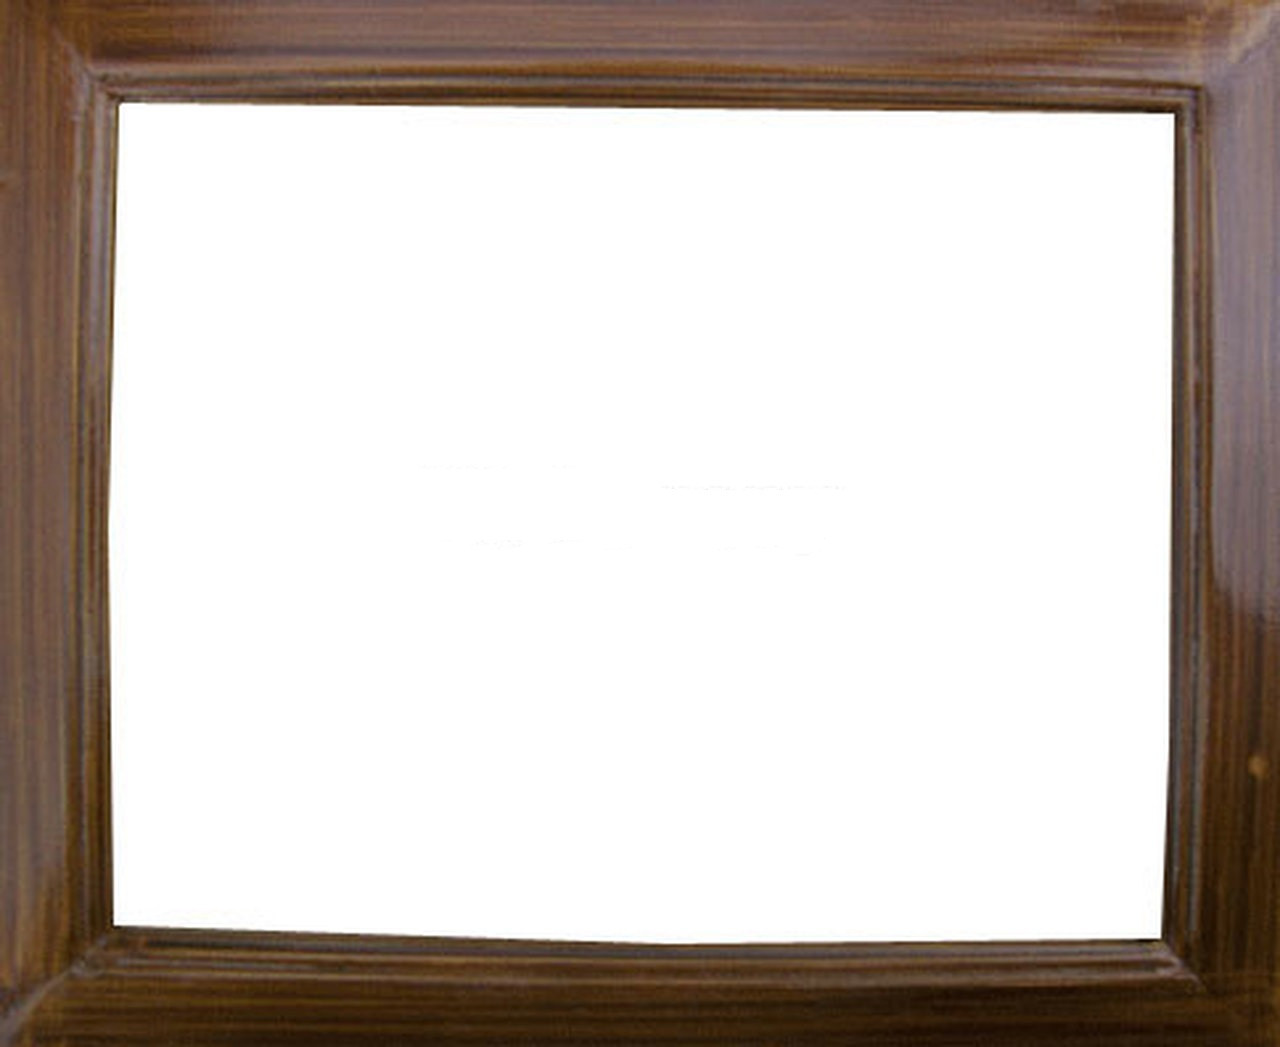 10x20 Traditional Mahogany Complete Wood Picture Frame with UV